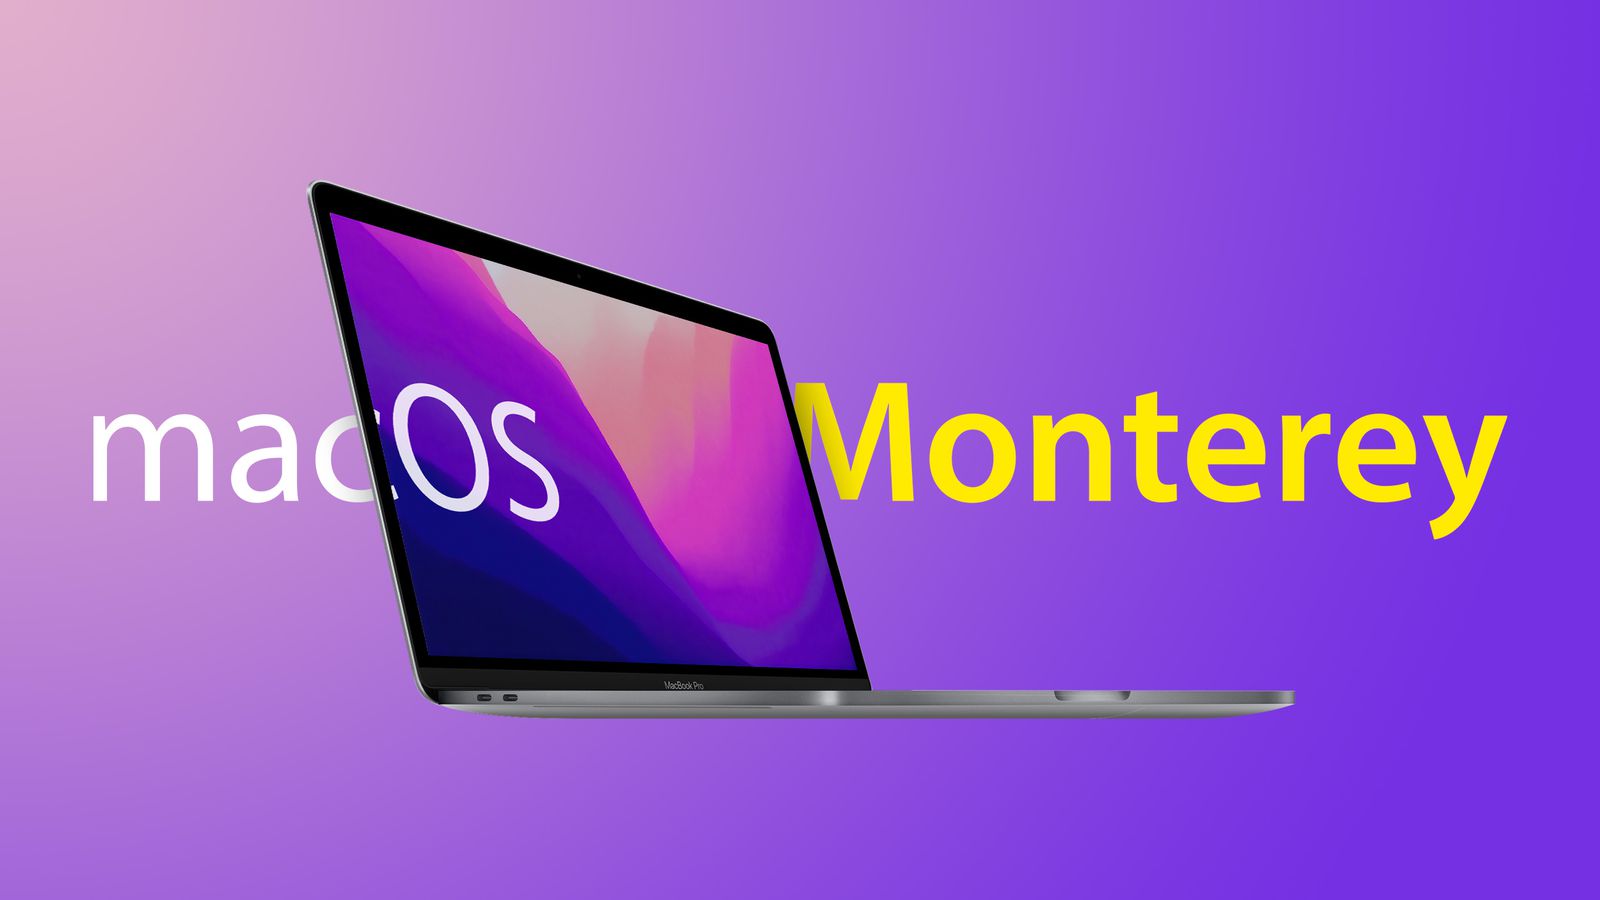 Are You Ready to Explore macOS Monterey?